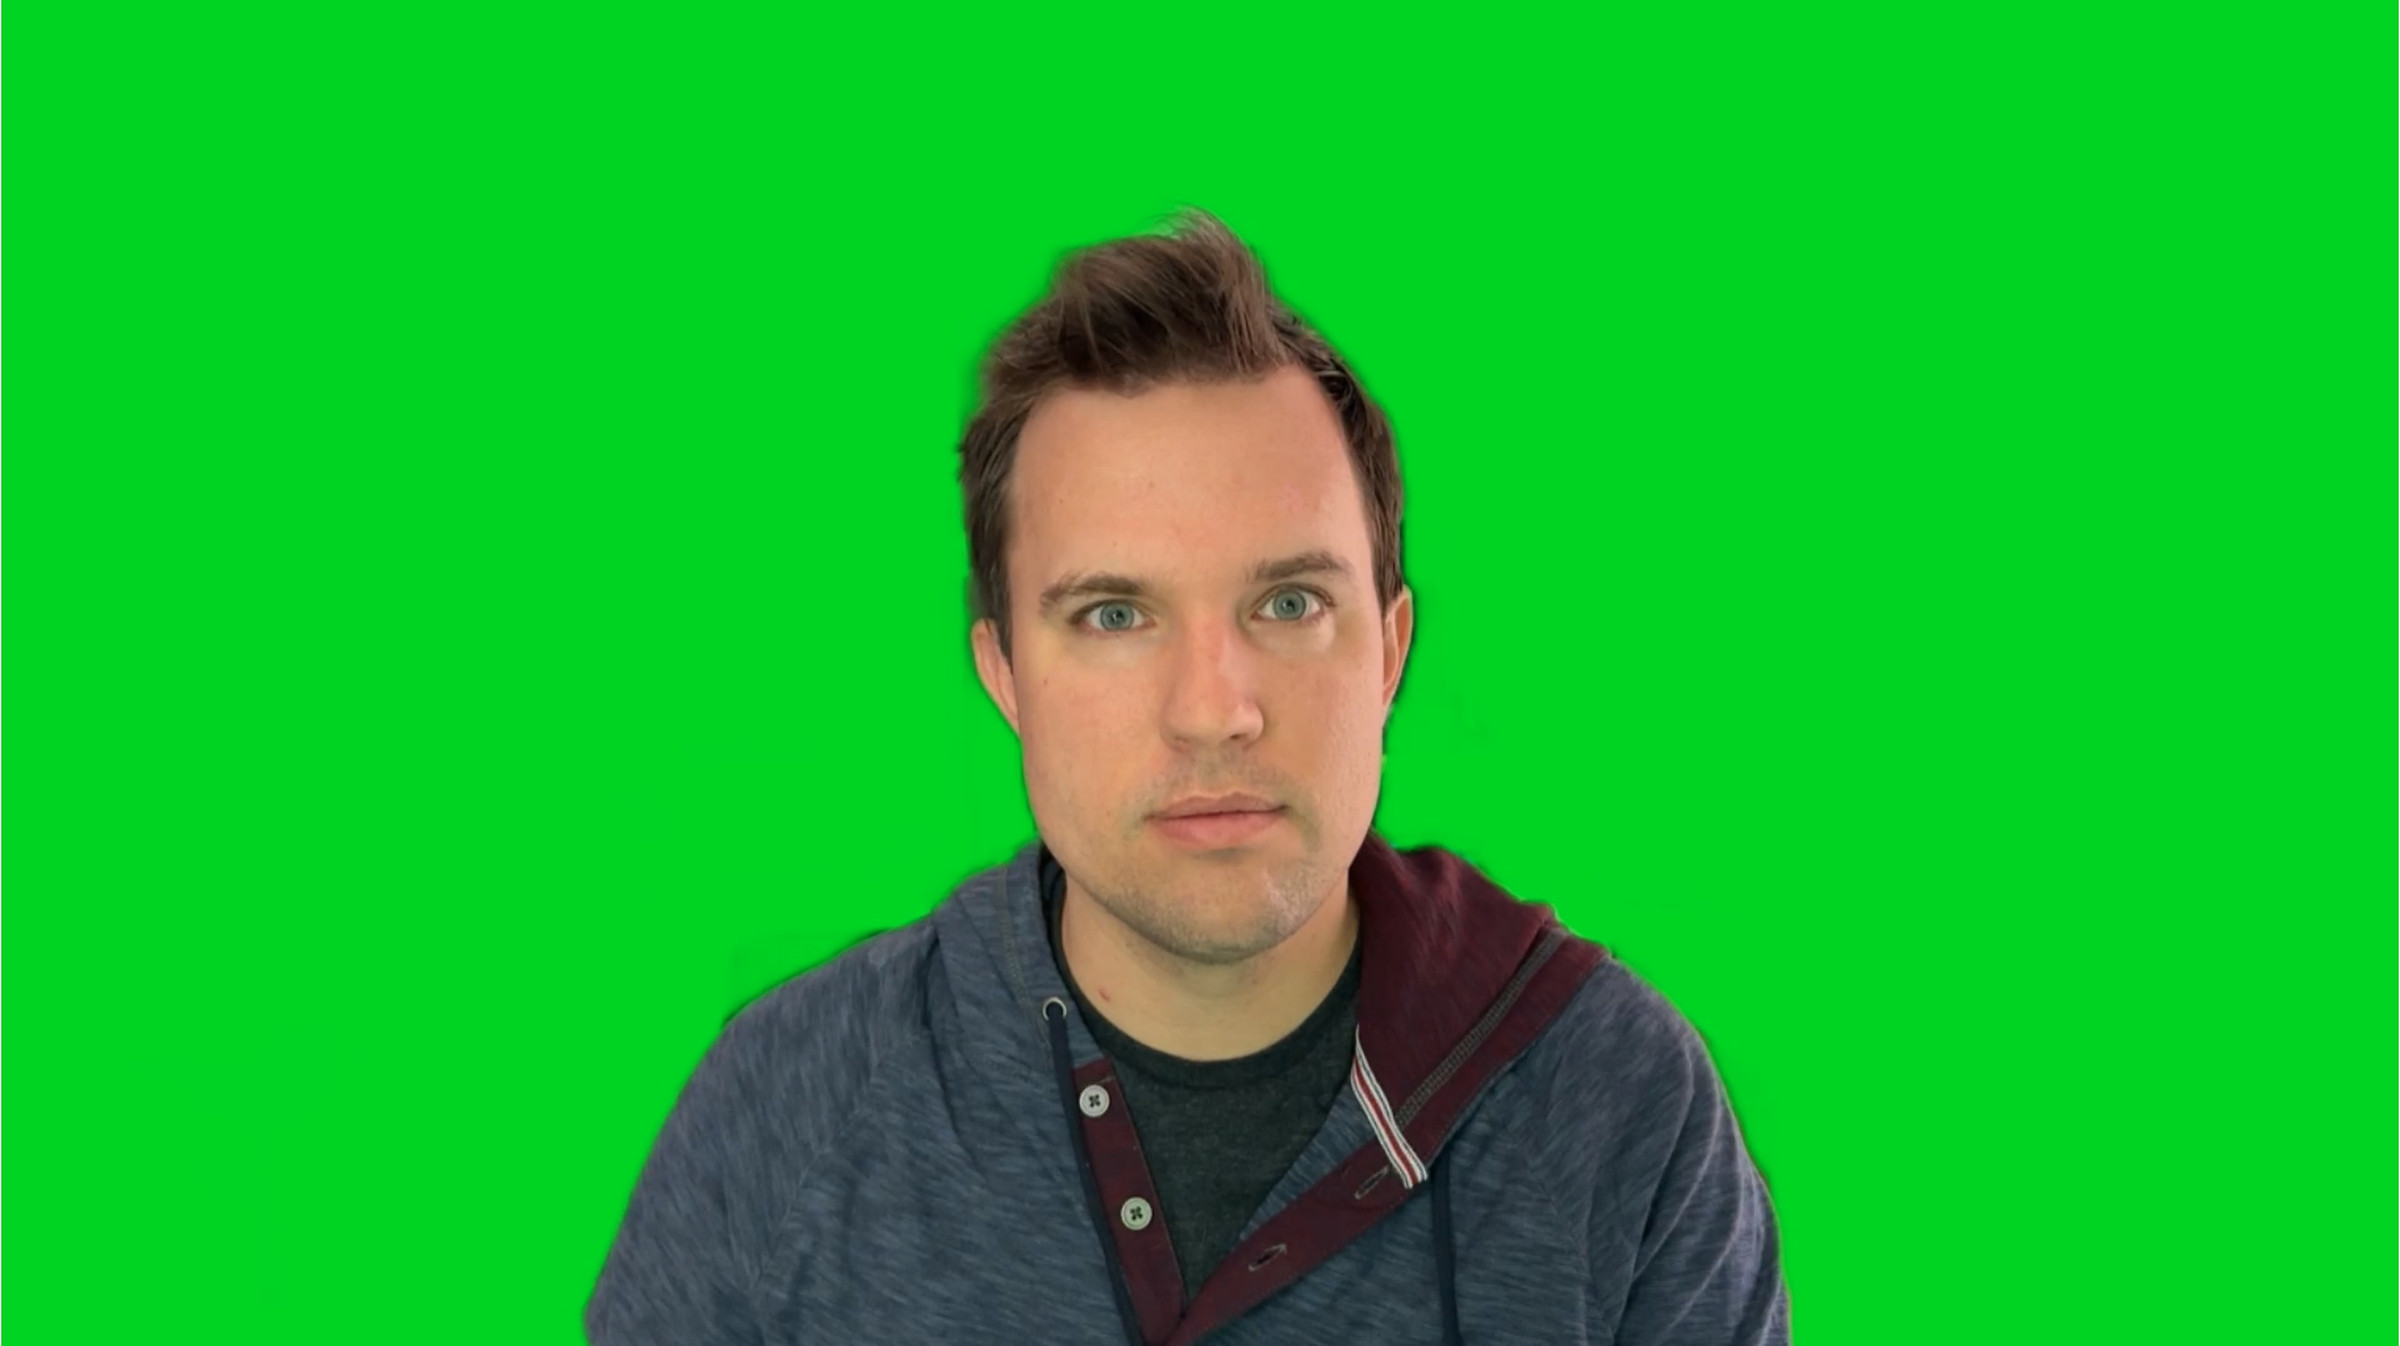 A screenshot of a man in front of a software-created green screen.